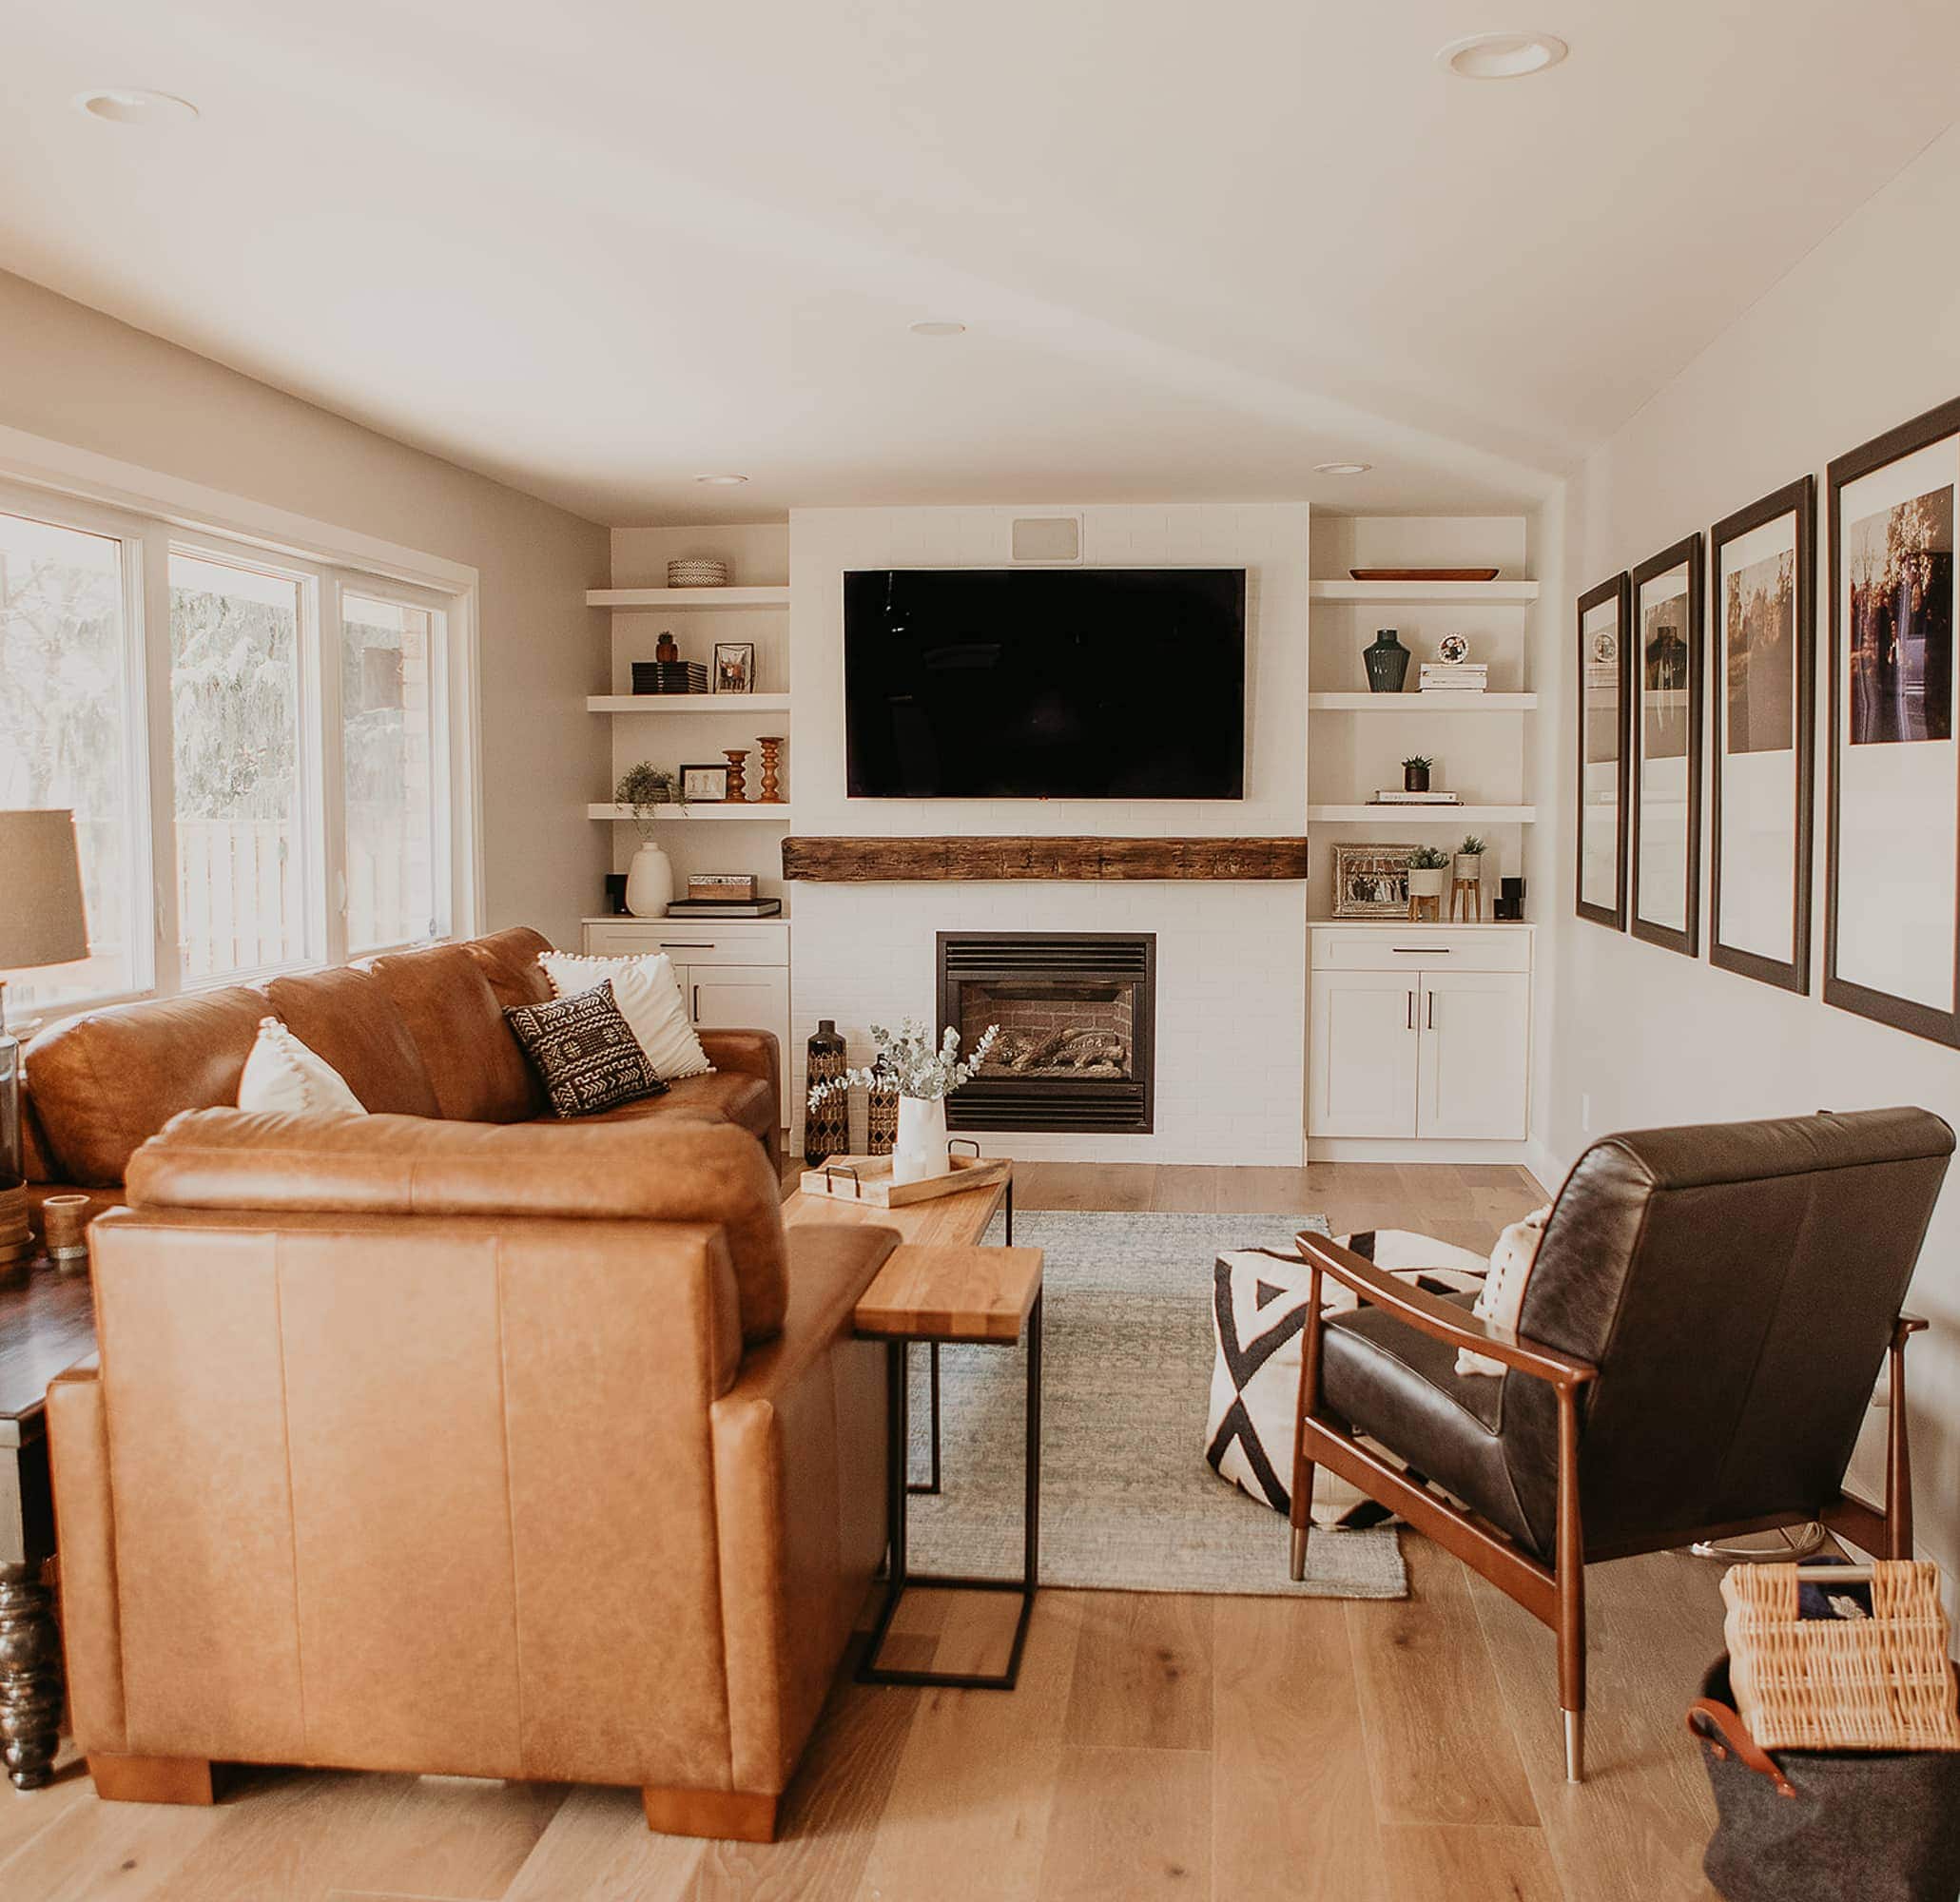 Britney's modern farmhouse tour - a look at the living room